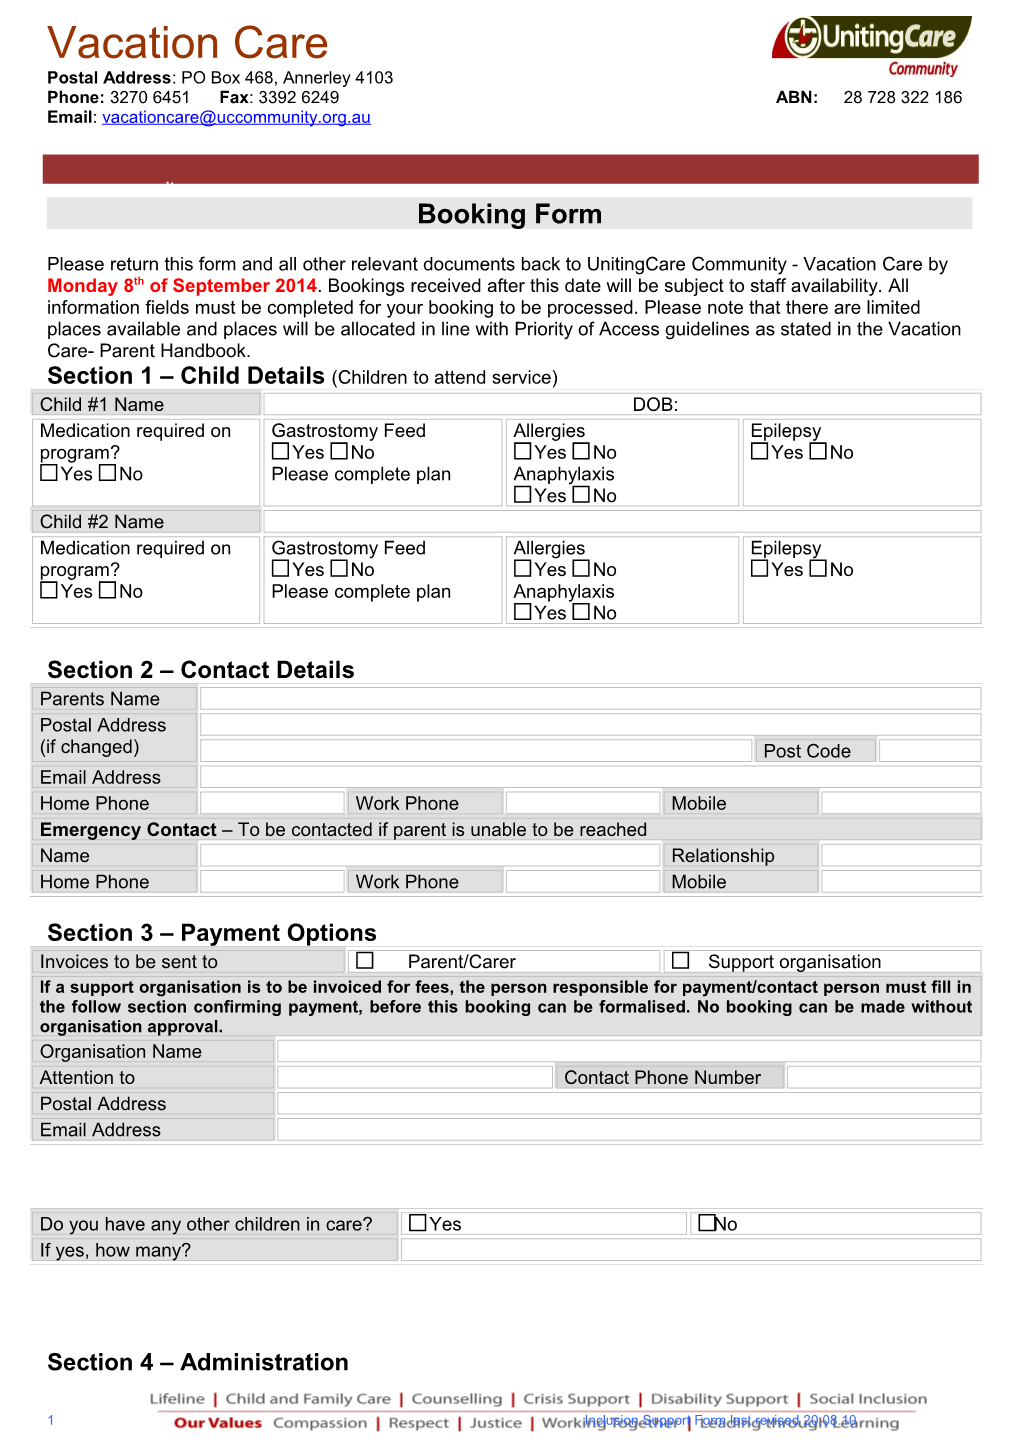 UC Client Booking Form Sep 2014